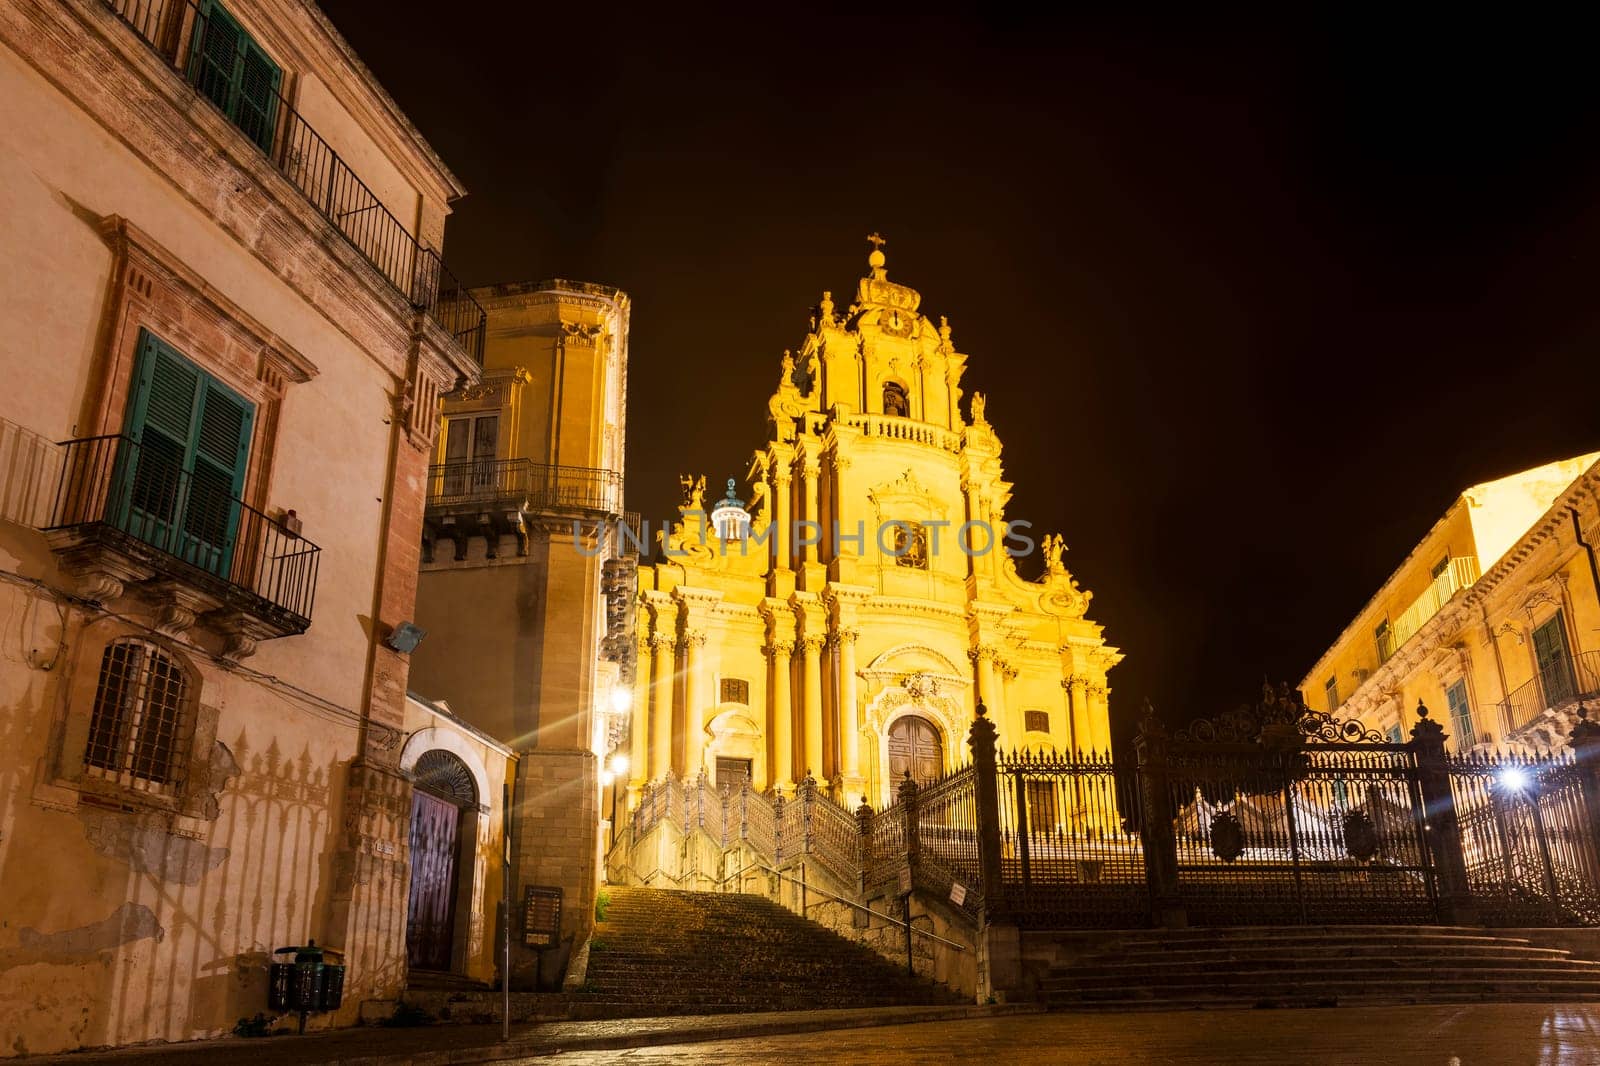 Night view of the piazza duomo and cathedral of San Giorgio in Ragusa ibla, Sicily